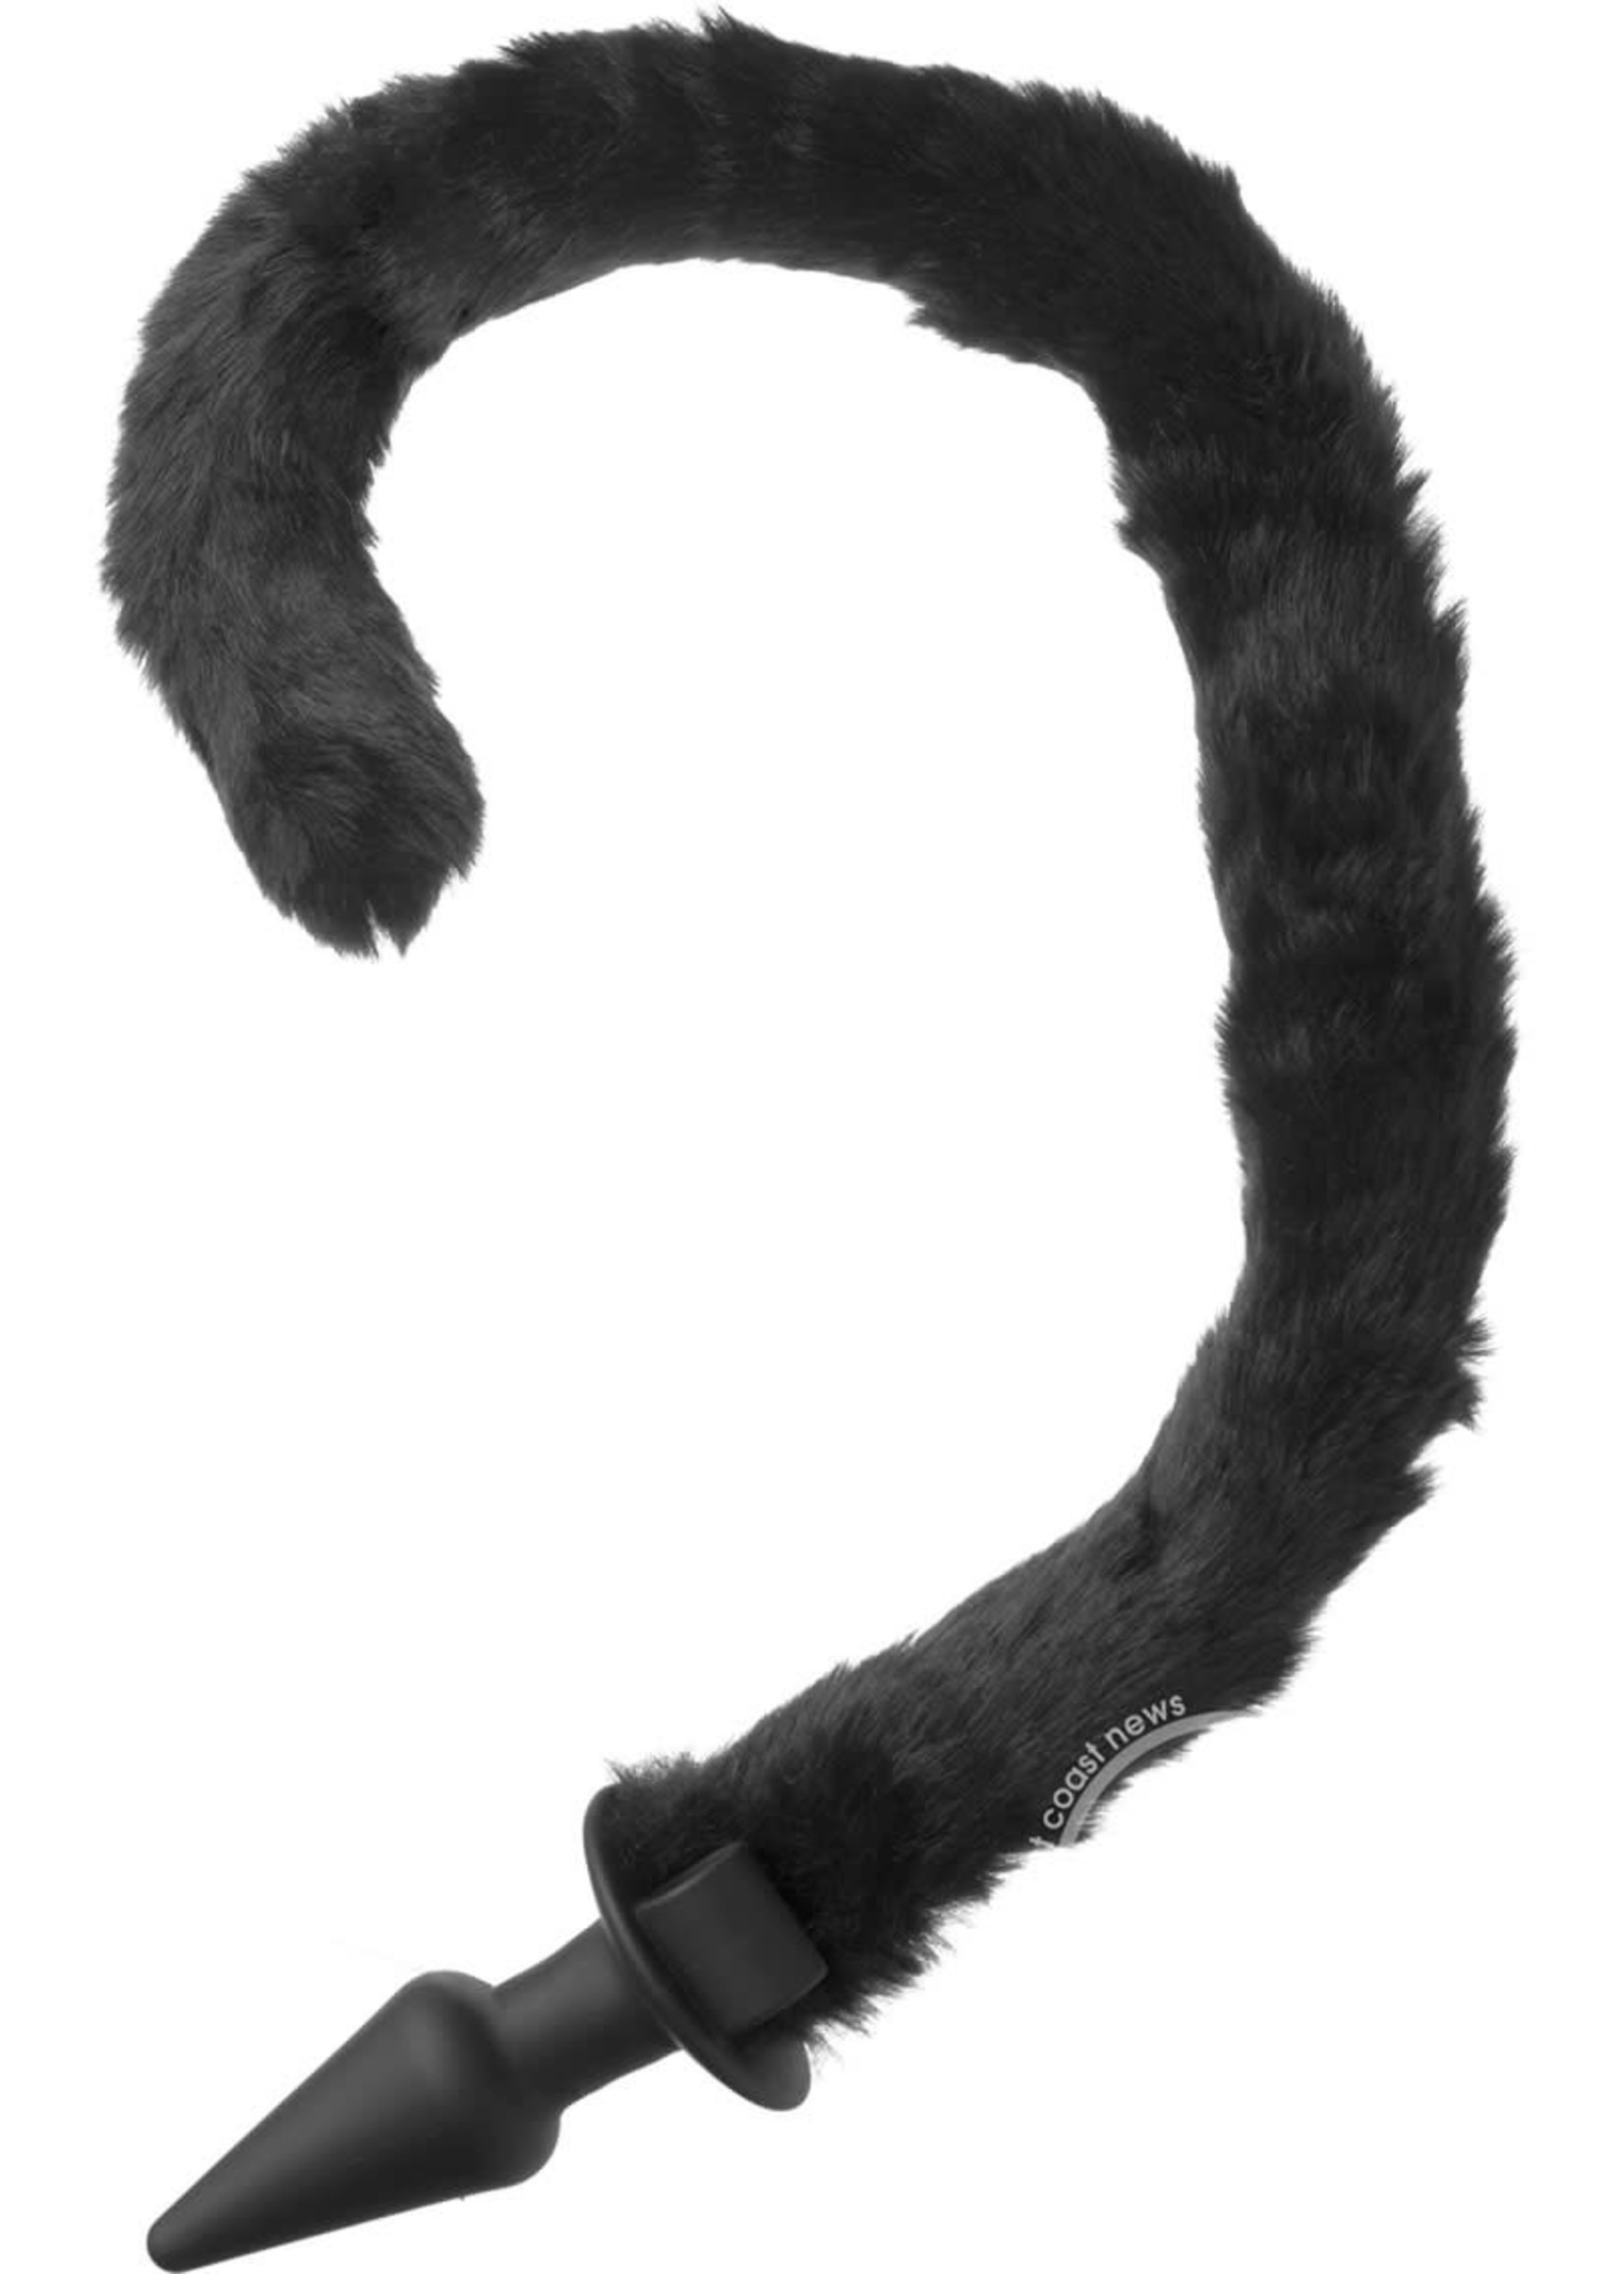 XR Brands Frisky Bad Kitty Silicone Cat Tail Anal Plug Black 24 Inch